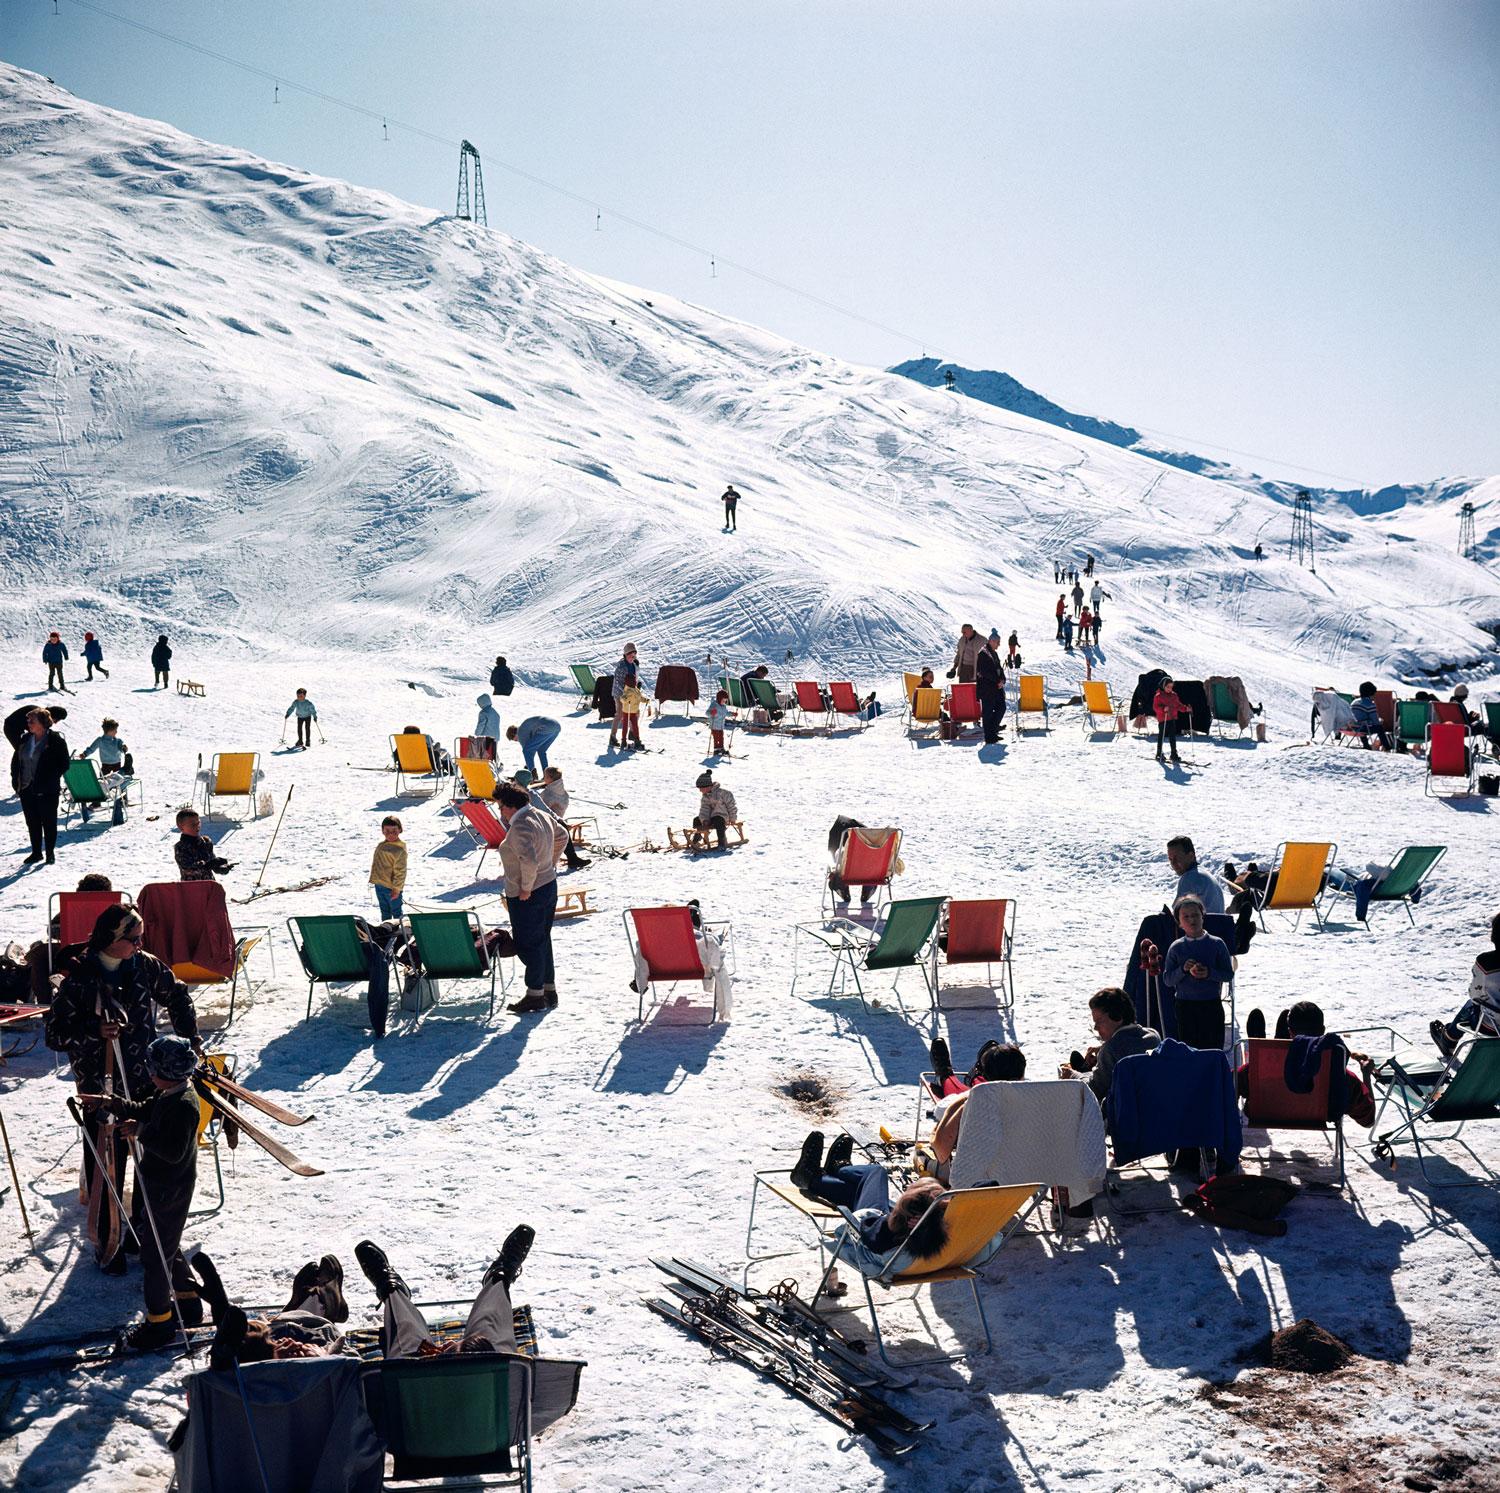 Skiers At Verbier
1964
C-Print
Estate signature stamped and hand numbered edition of 150 with certificate of authenticity from the estate.   

1964: Skiers relax in deckchairs on the slopes at Verbier in Switzerland. (Photo by Slim Aarons/Getty